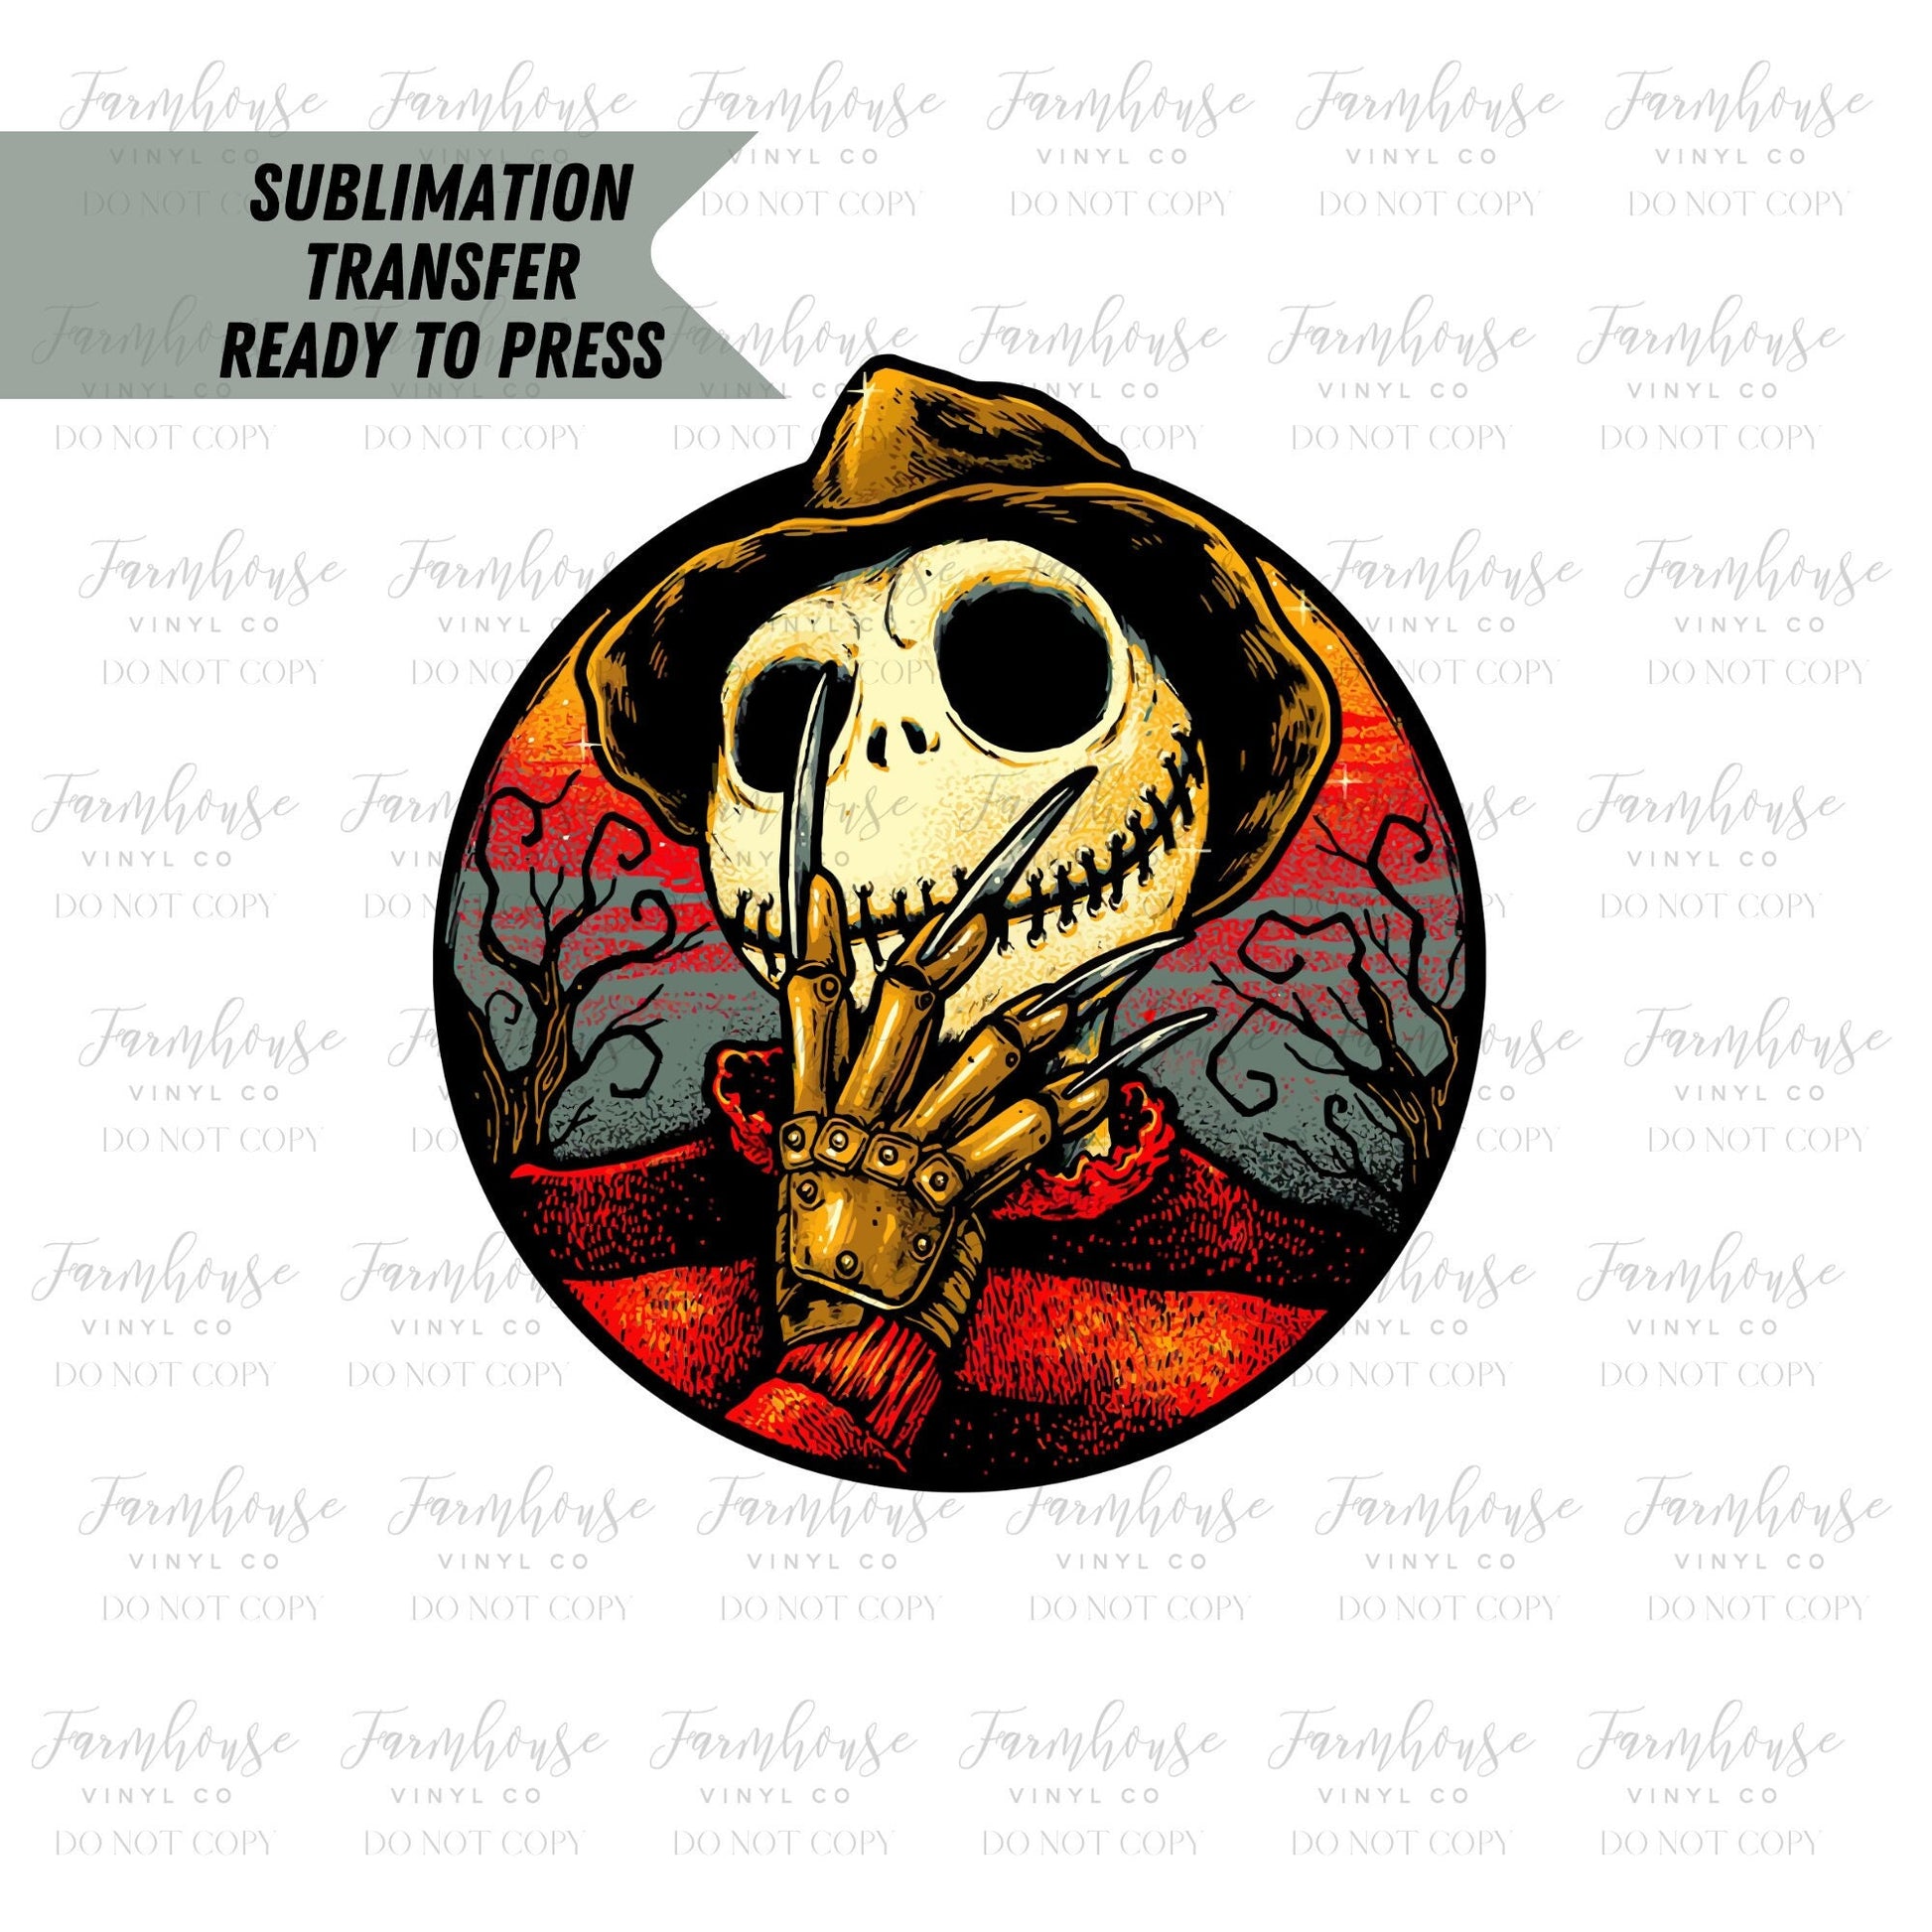 Jack Freddie Halloween Ready To Press, Sublimation Transfers, Horror Movie Lover, Sublimation, Transfer Ready Press, Halloween Heat Transfer - Farmhouse Vinyl Co